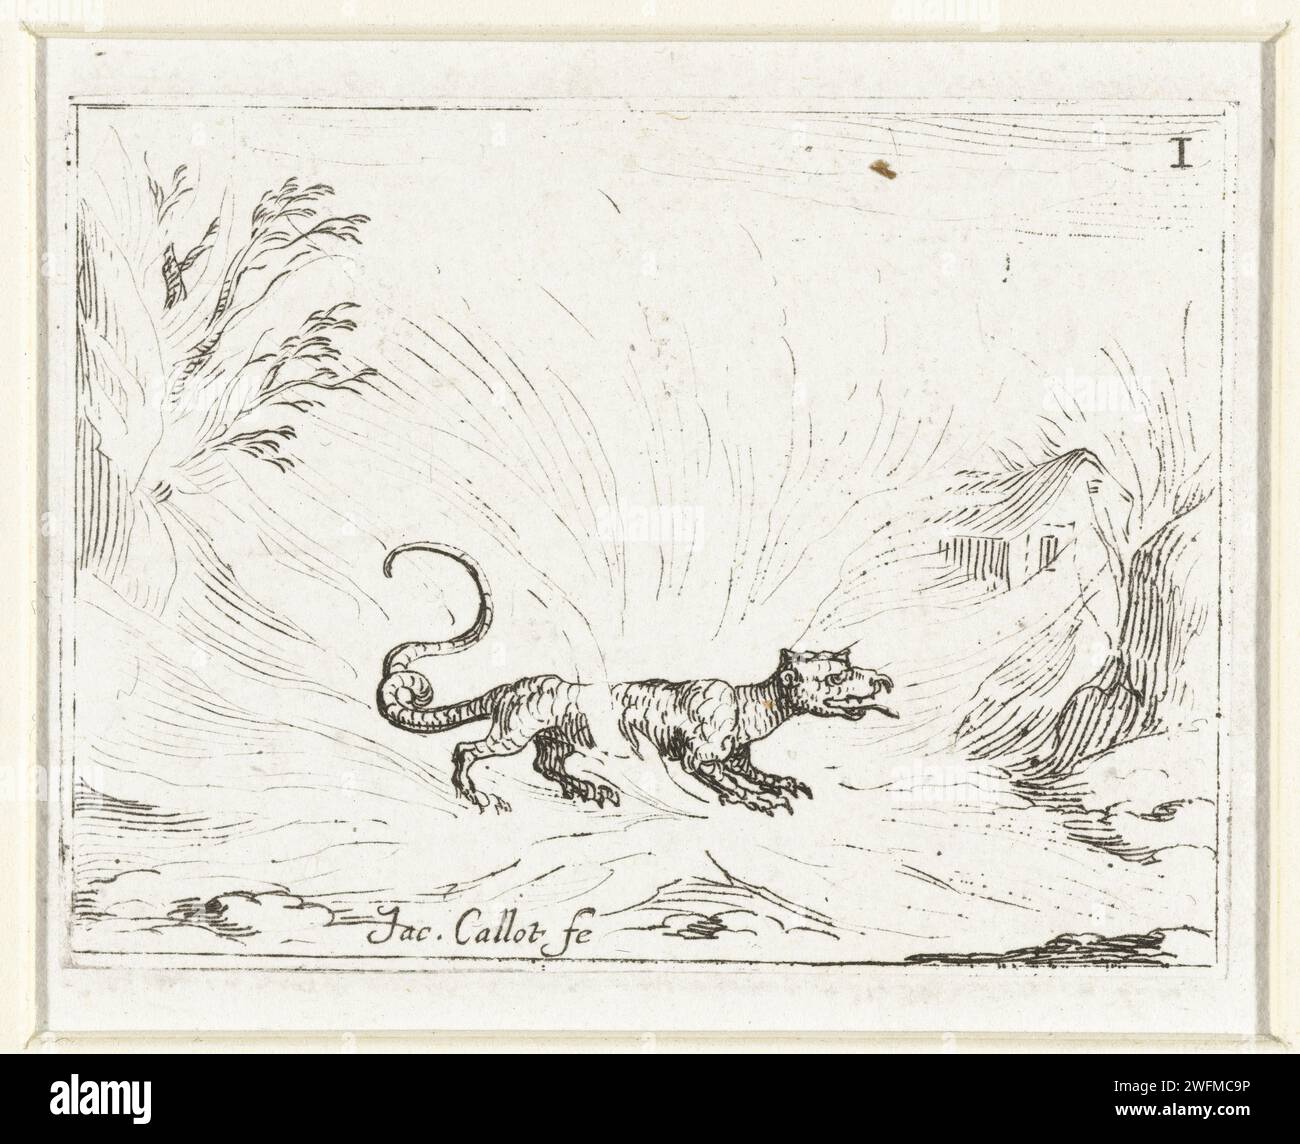 Salamander in the fire, Jacques Callot, 1646 print Presentation of a salamander surrounded by flames. On the right in the background a house. This magazine is part of the emblem series 'Life of Maria in Emblemen'. In addition to a title page and 26 emblems, the first state of this series also includes three blades with hymns on Maria in book print without image. print maker: Nancypublisher: Paris paper etching salamander (fabulous animal); salamander as spirit of fire Stock Photo